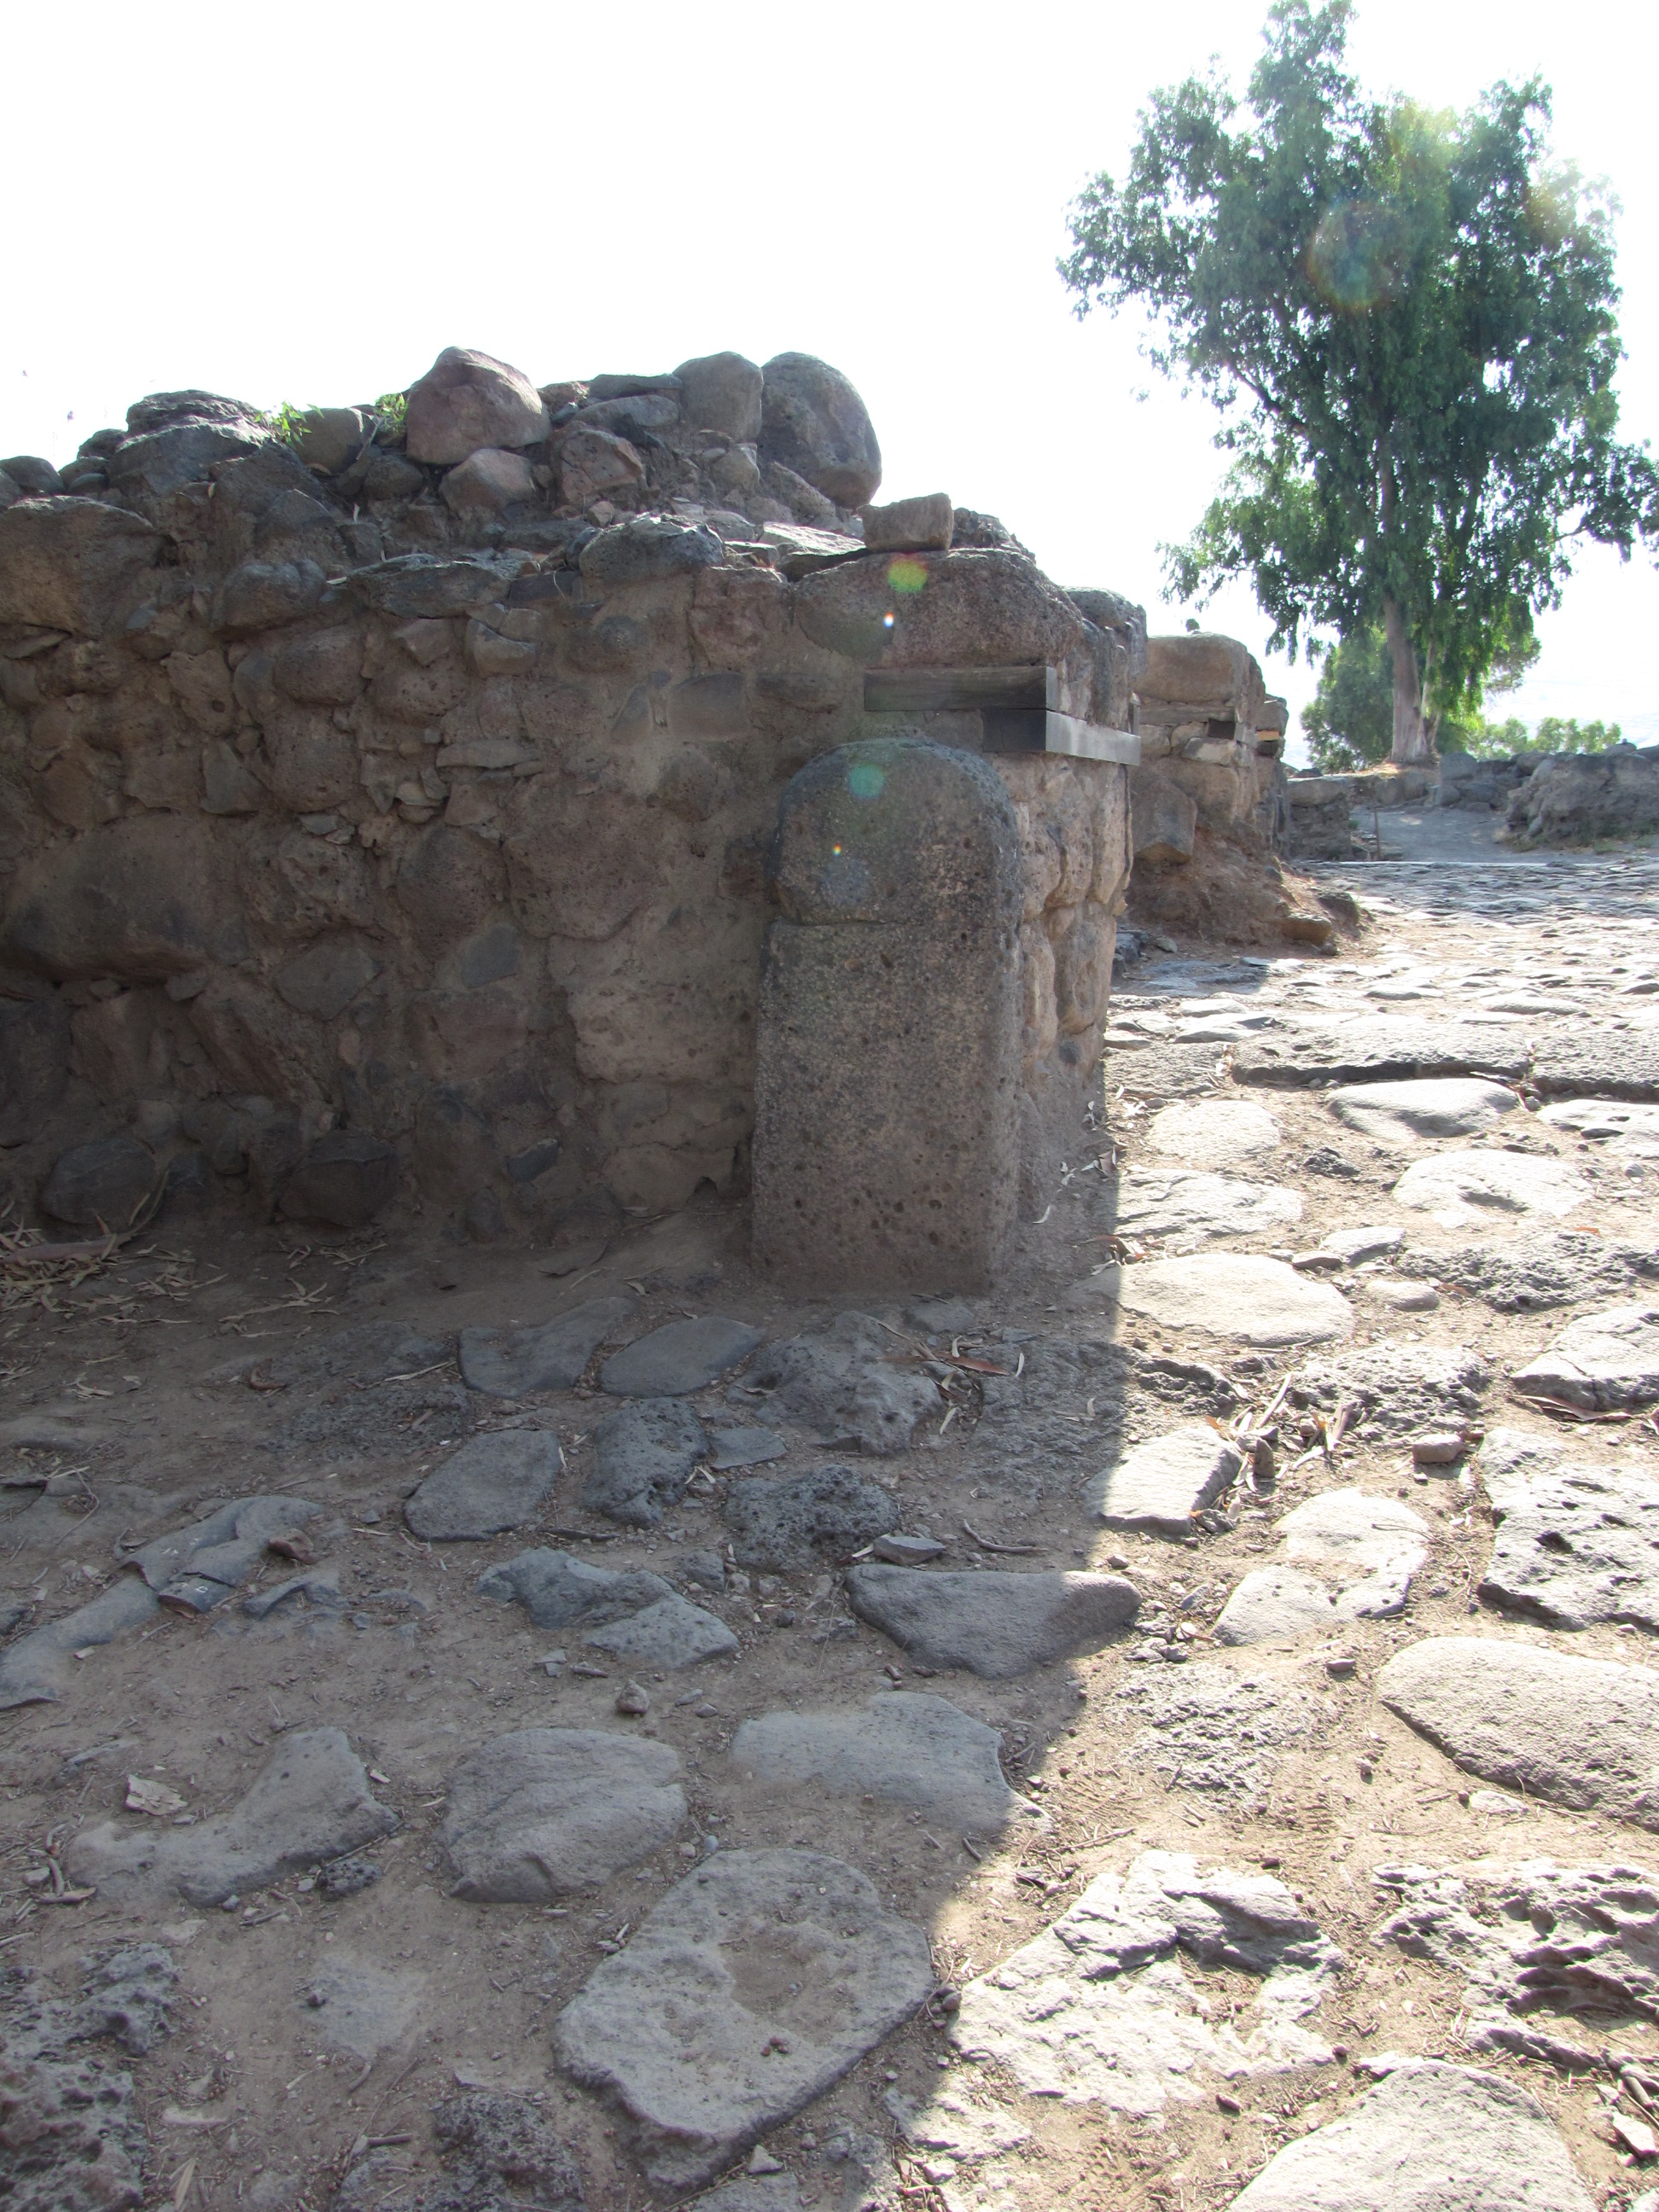 Geshur standing deity stone on the left side of the 4-chamber gate from 1000 BC